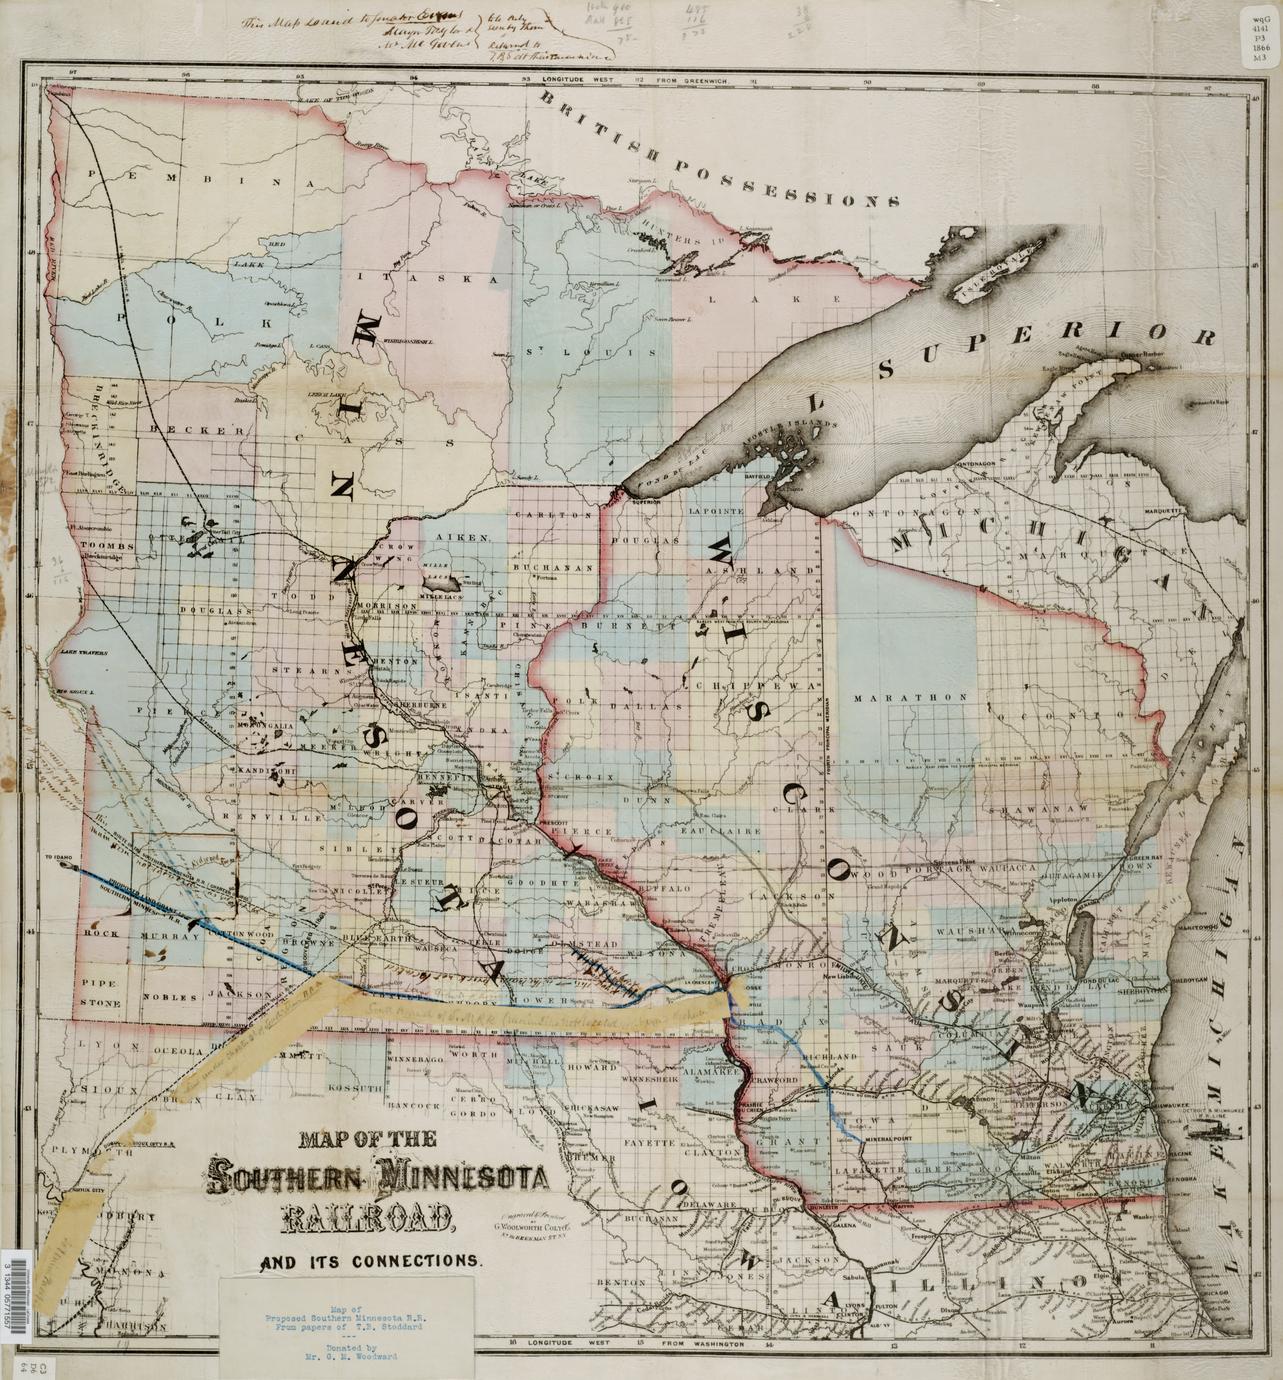 Map of the Southern Minnesota Railroad and its connections